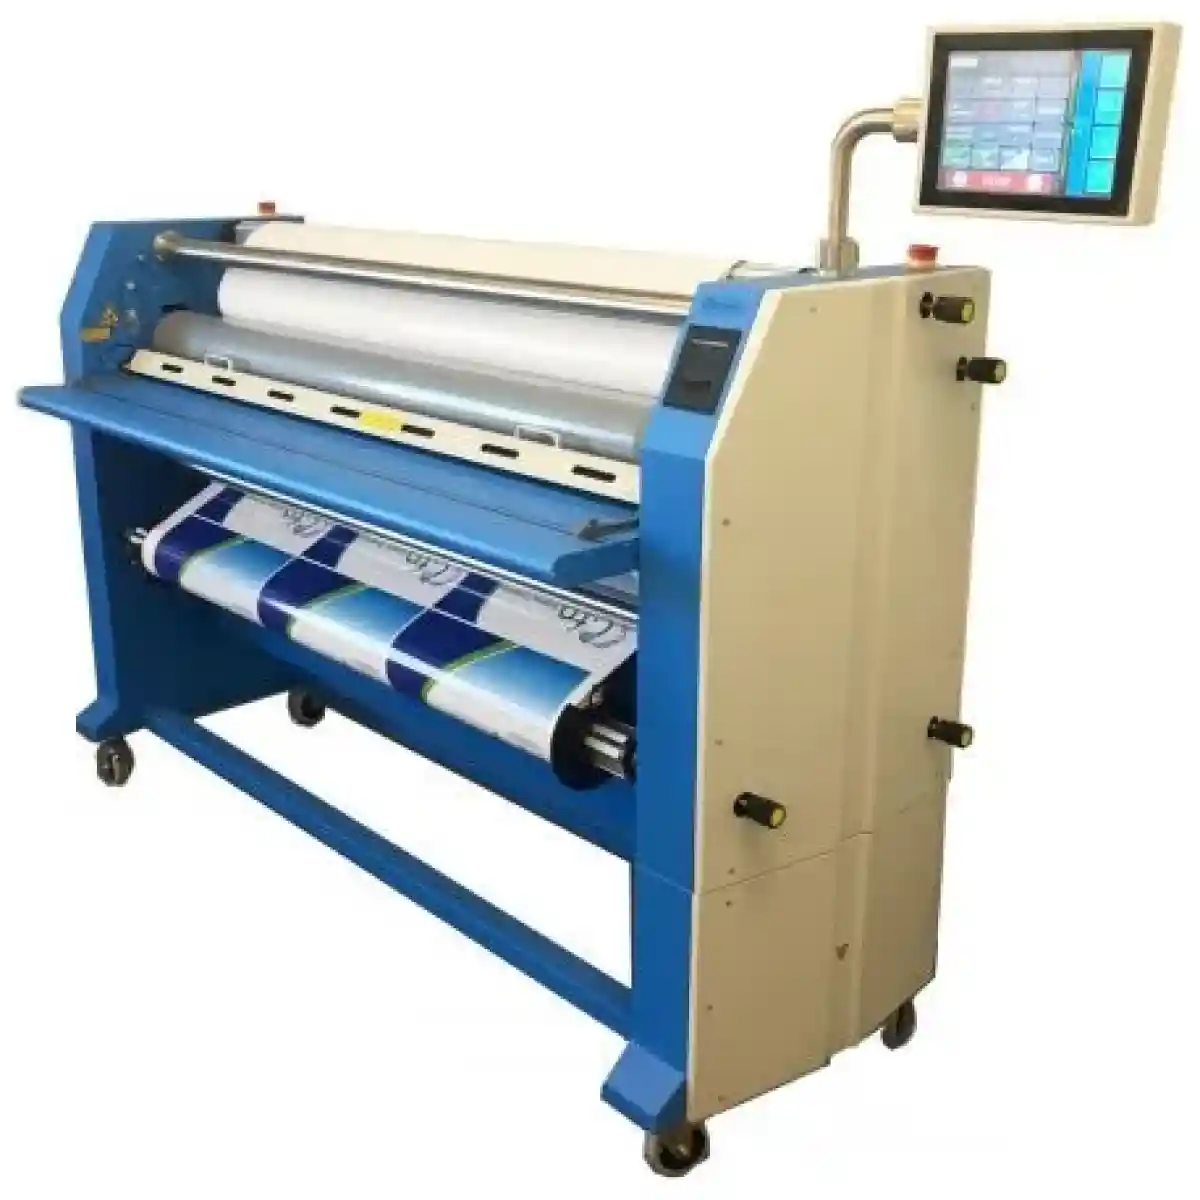 GFP 663Th 63" Top Heat Laminator With Smart Finishing Technology And Digital Microprocessor GRAPHIC FINISHING PARTNERS®